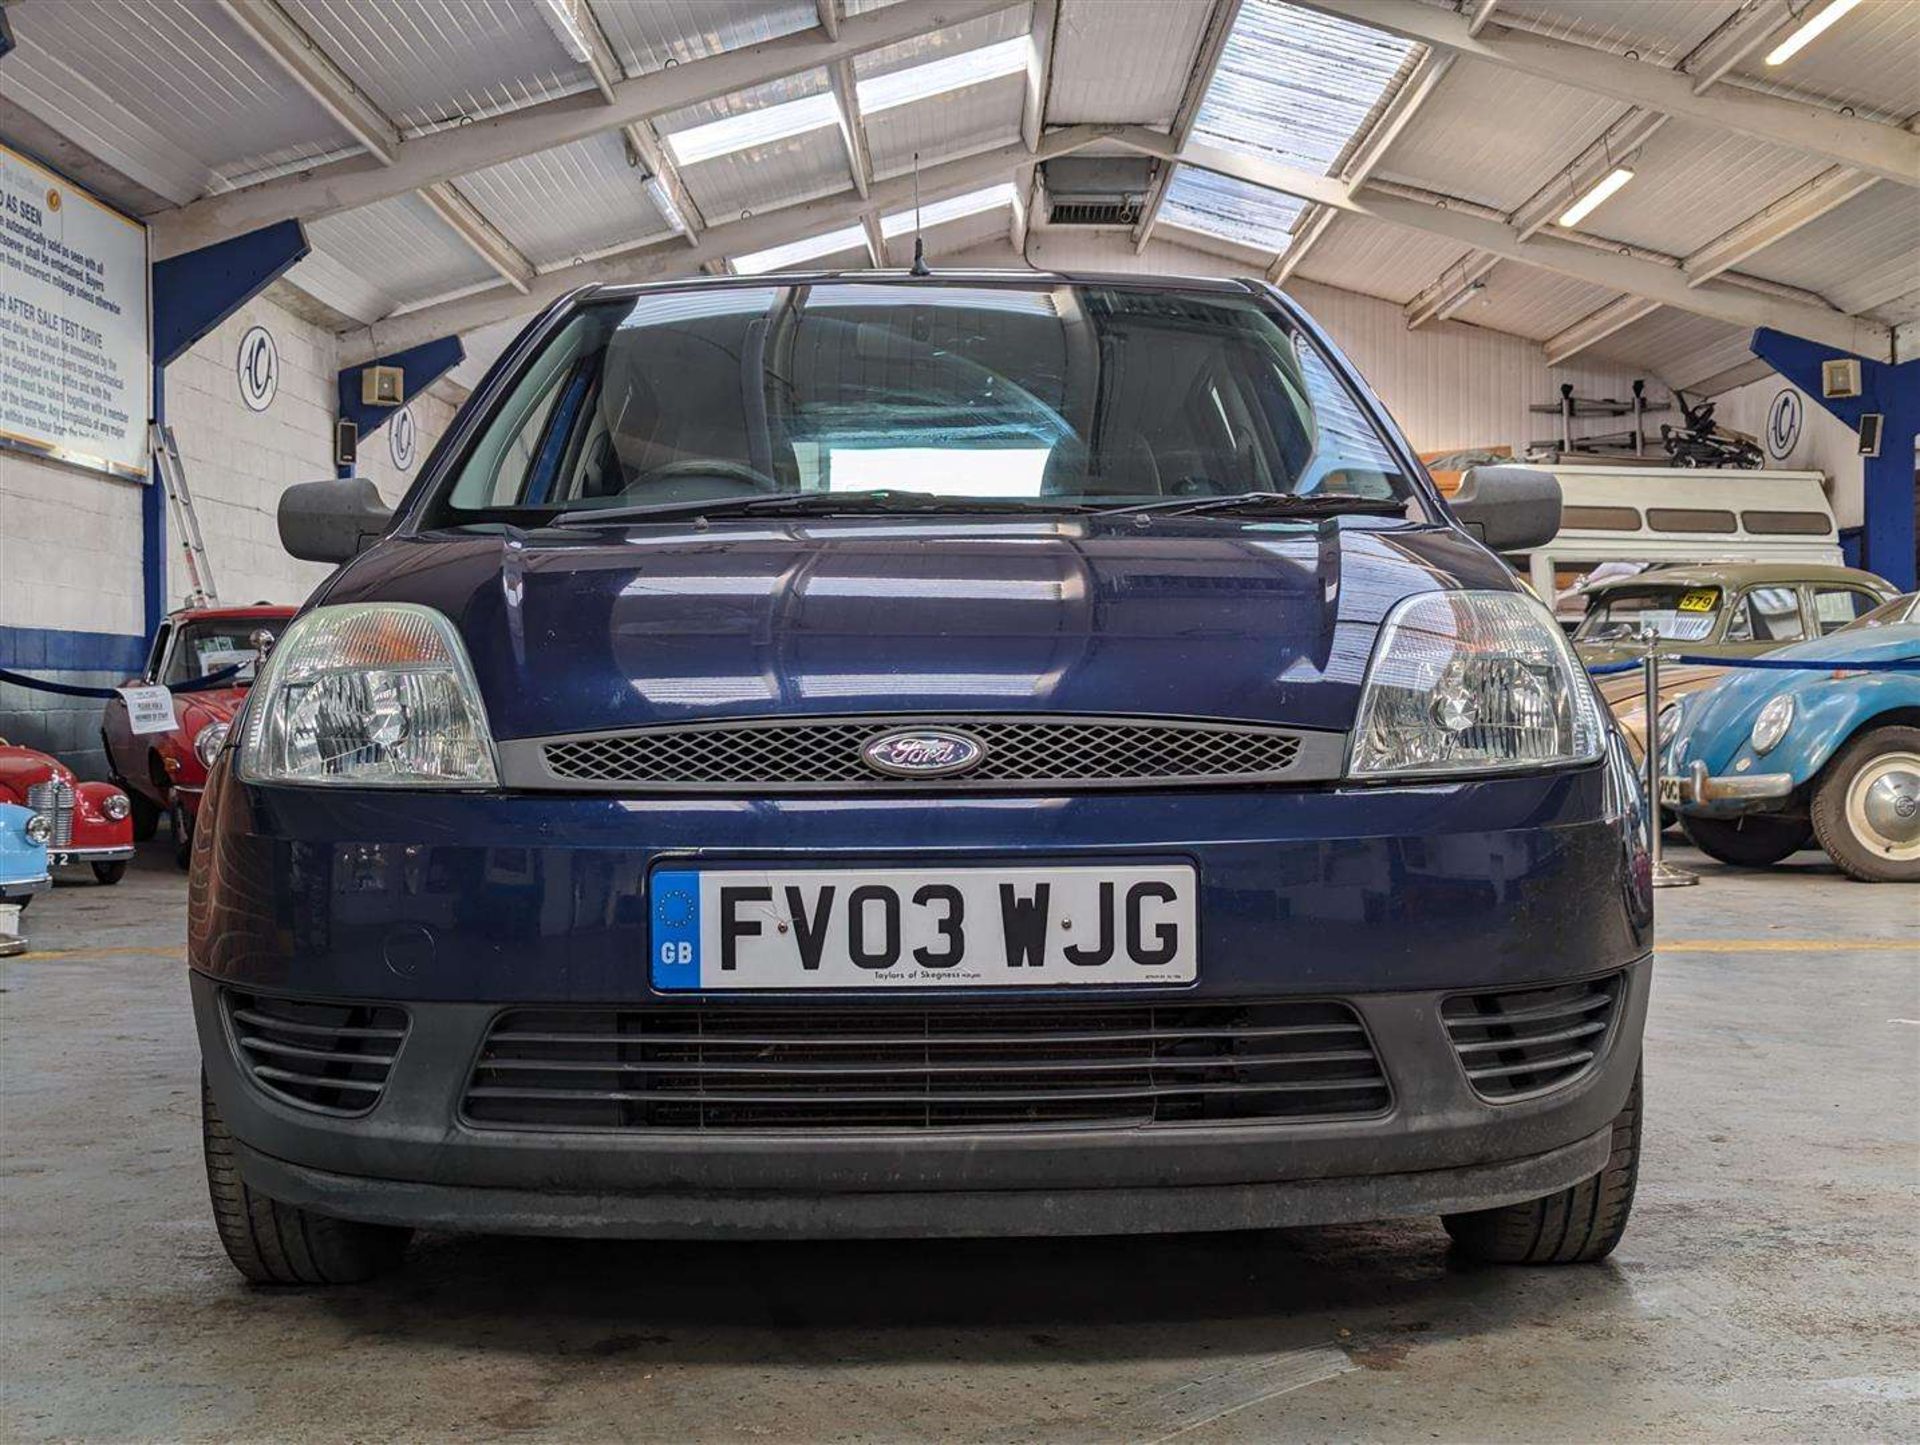 2003 FORD FIESTA LX - Image 30 of 30